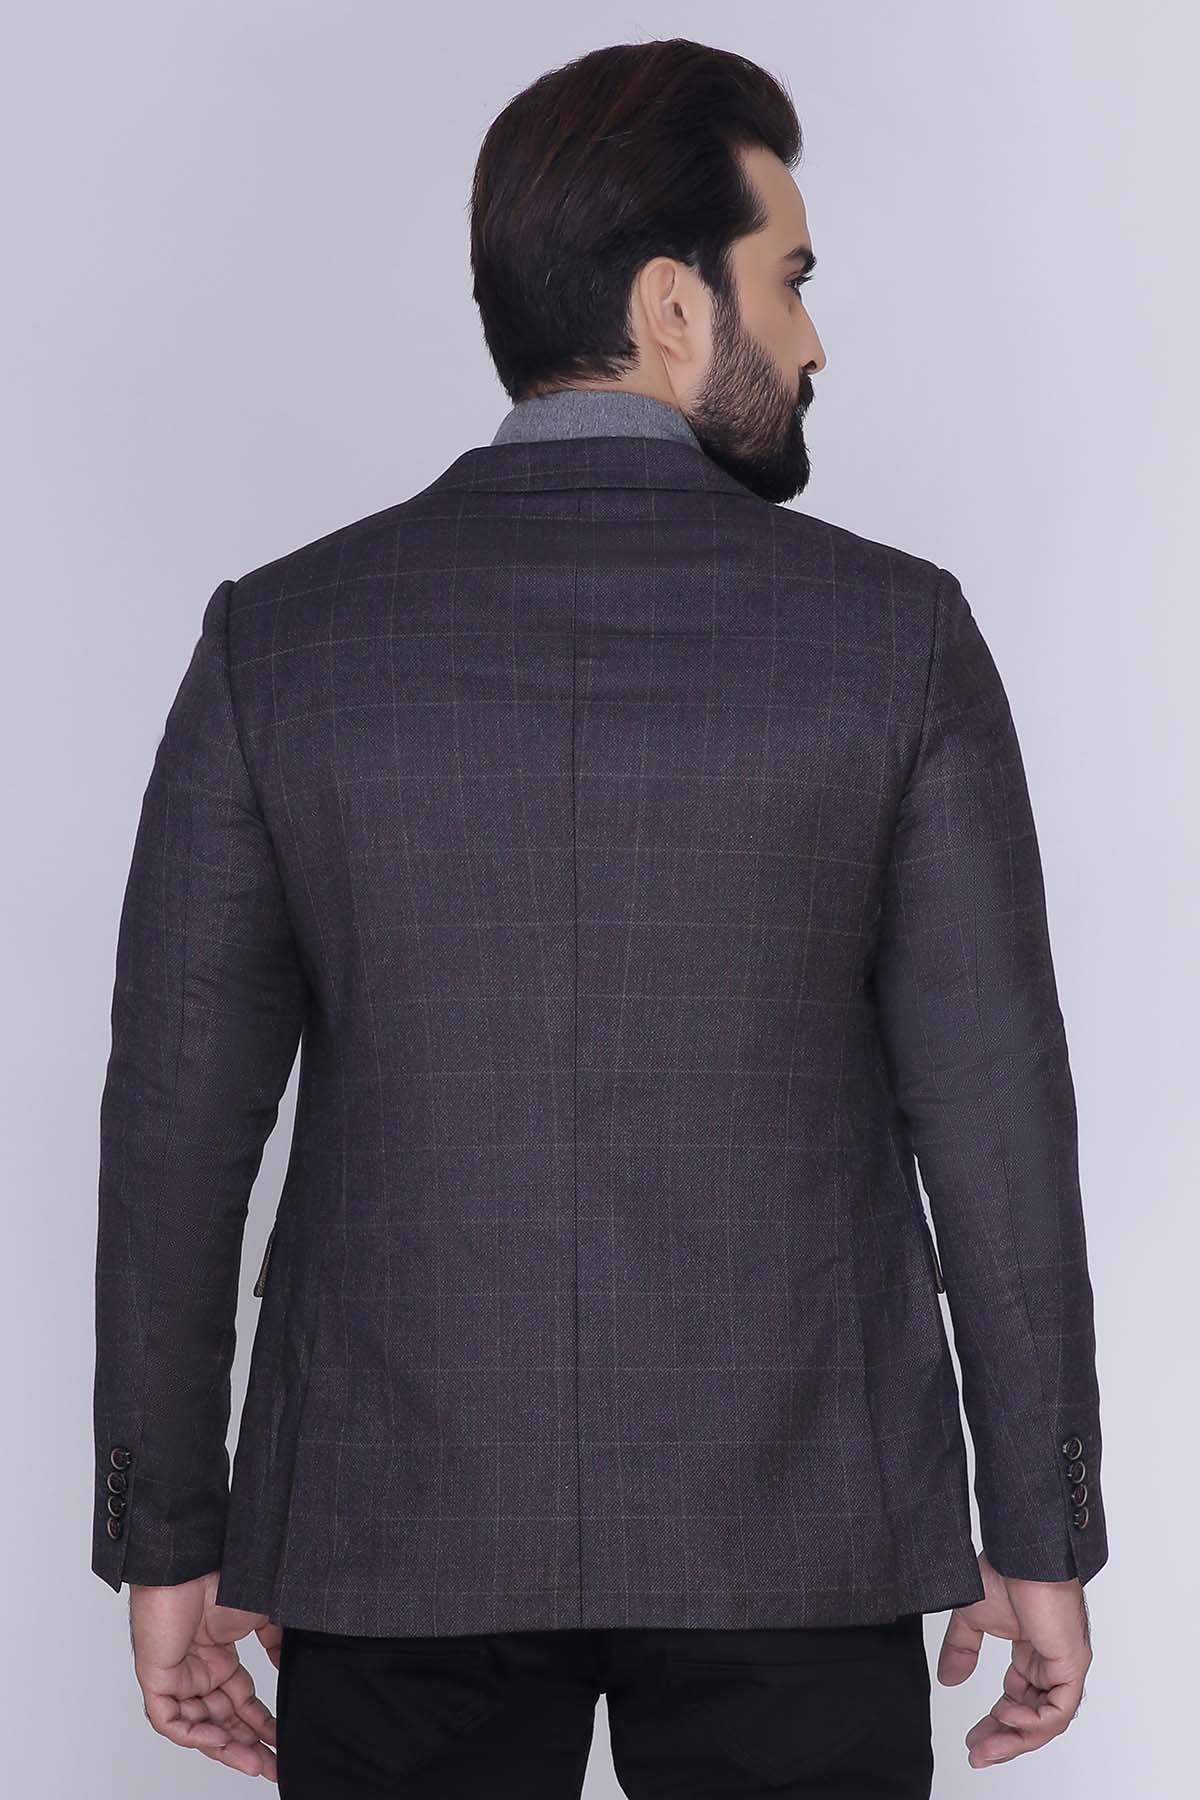 CASUAL COAT 2 BUTTON SLIM FIT CHARCOAL at Charcoal Clothing